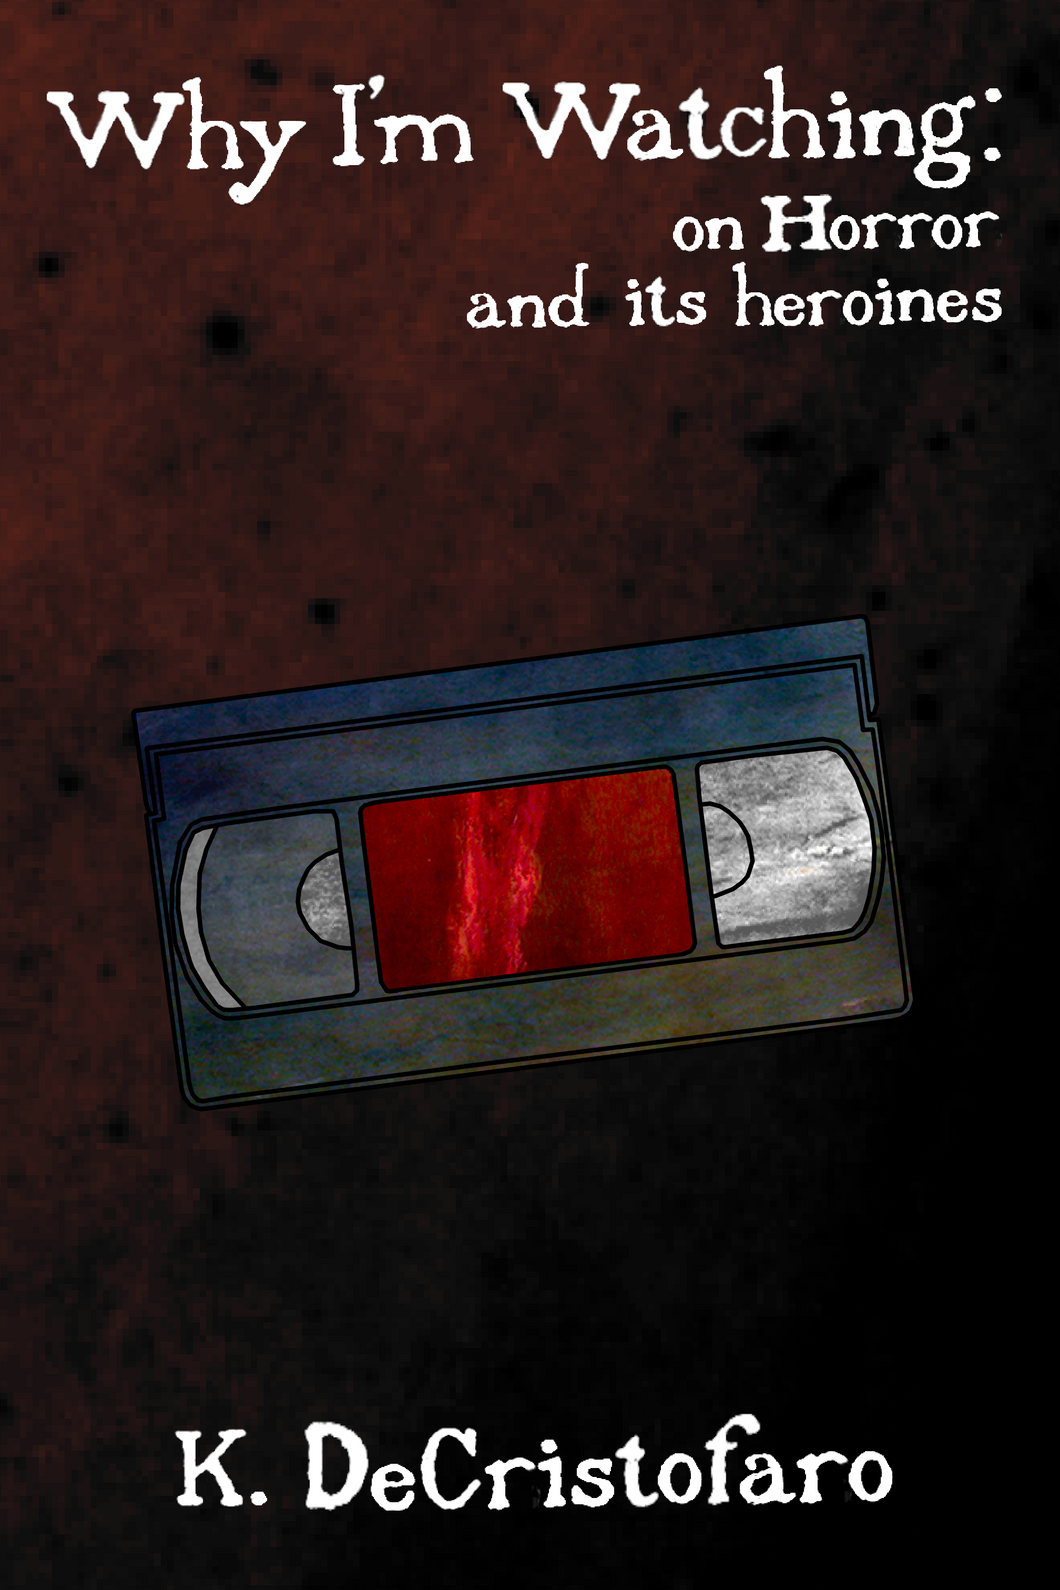 Why I'm Watching: on Horror and its heroines, by K. DeCristofaro-Print Books-Bottlecap Press